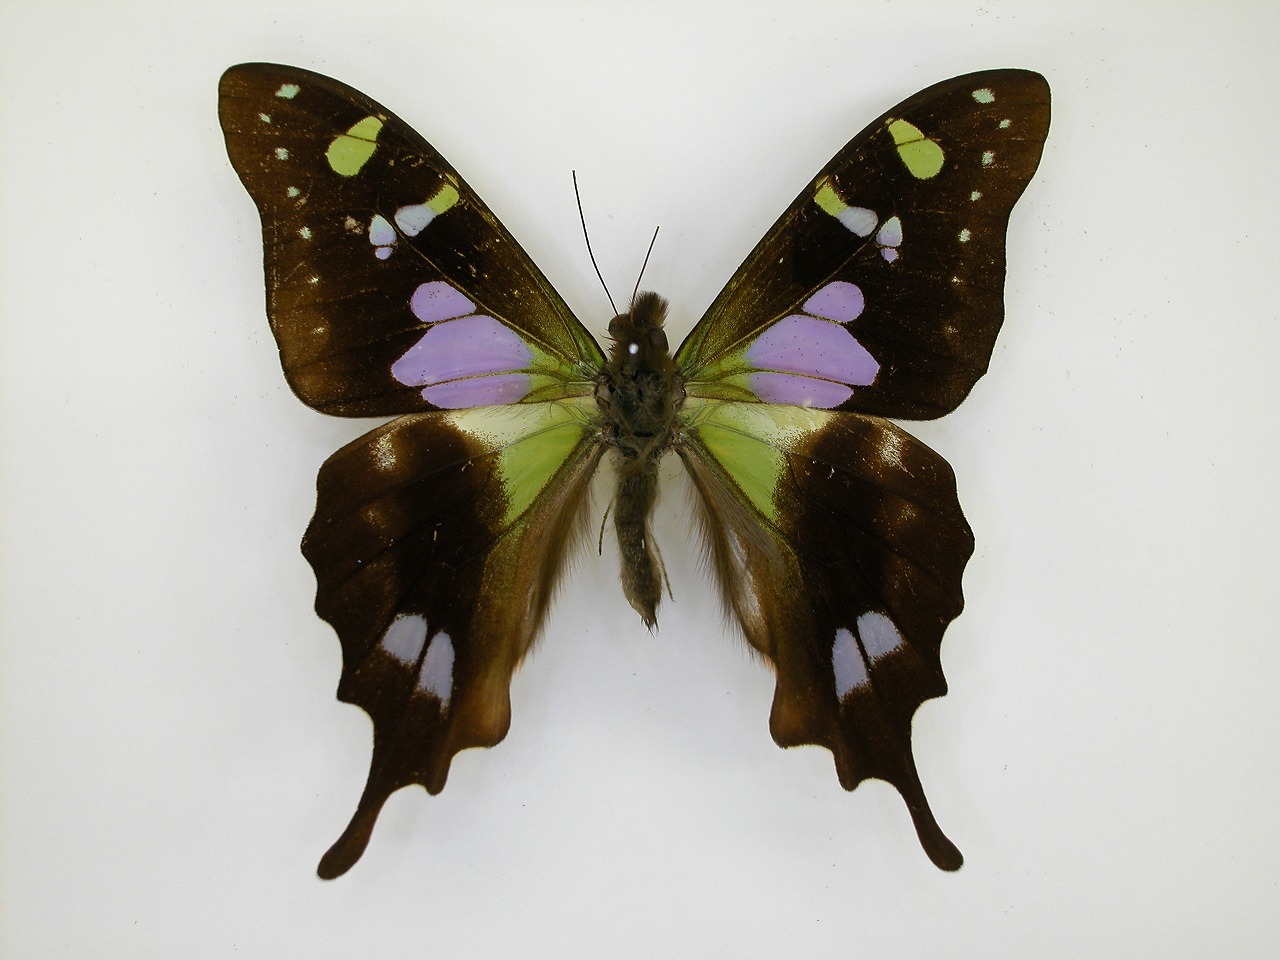 https://www.hitohaku.jp/material/l-material/butterfly-wing/1-papilionidae/B1-269884_A.jpg